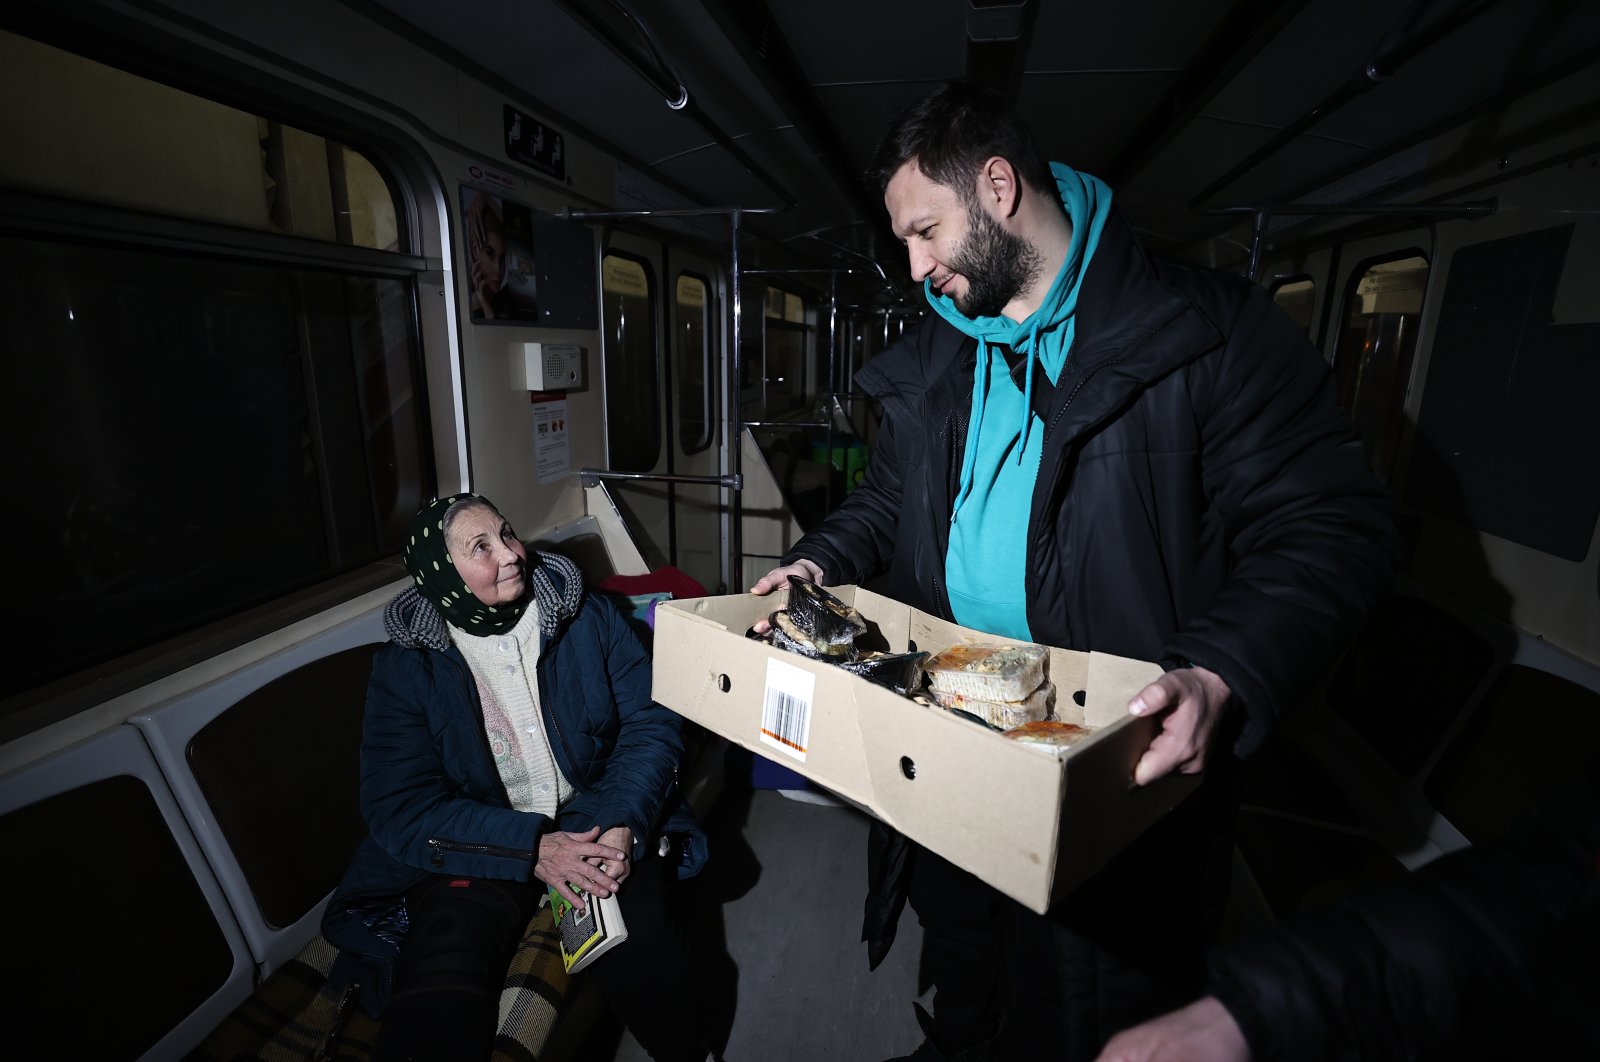 Onur Hekim delivers food to Ukrainians sheltering at a metro station, in Kyiv, Ukraine, March 14, 2022. (AA PHOTO)